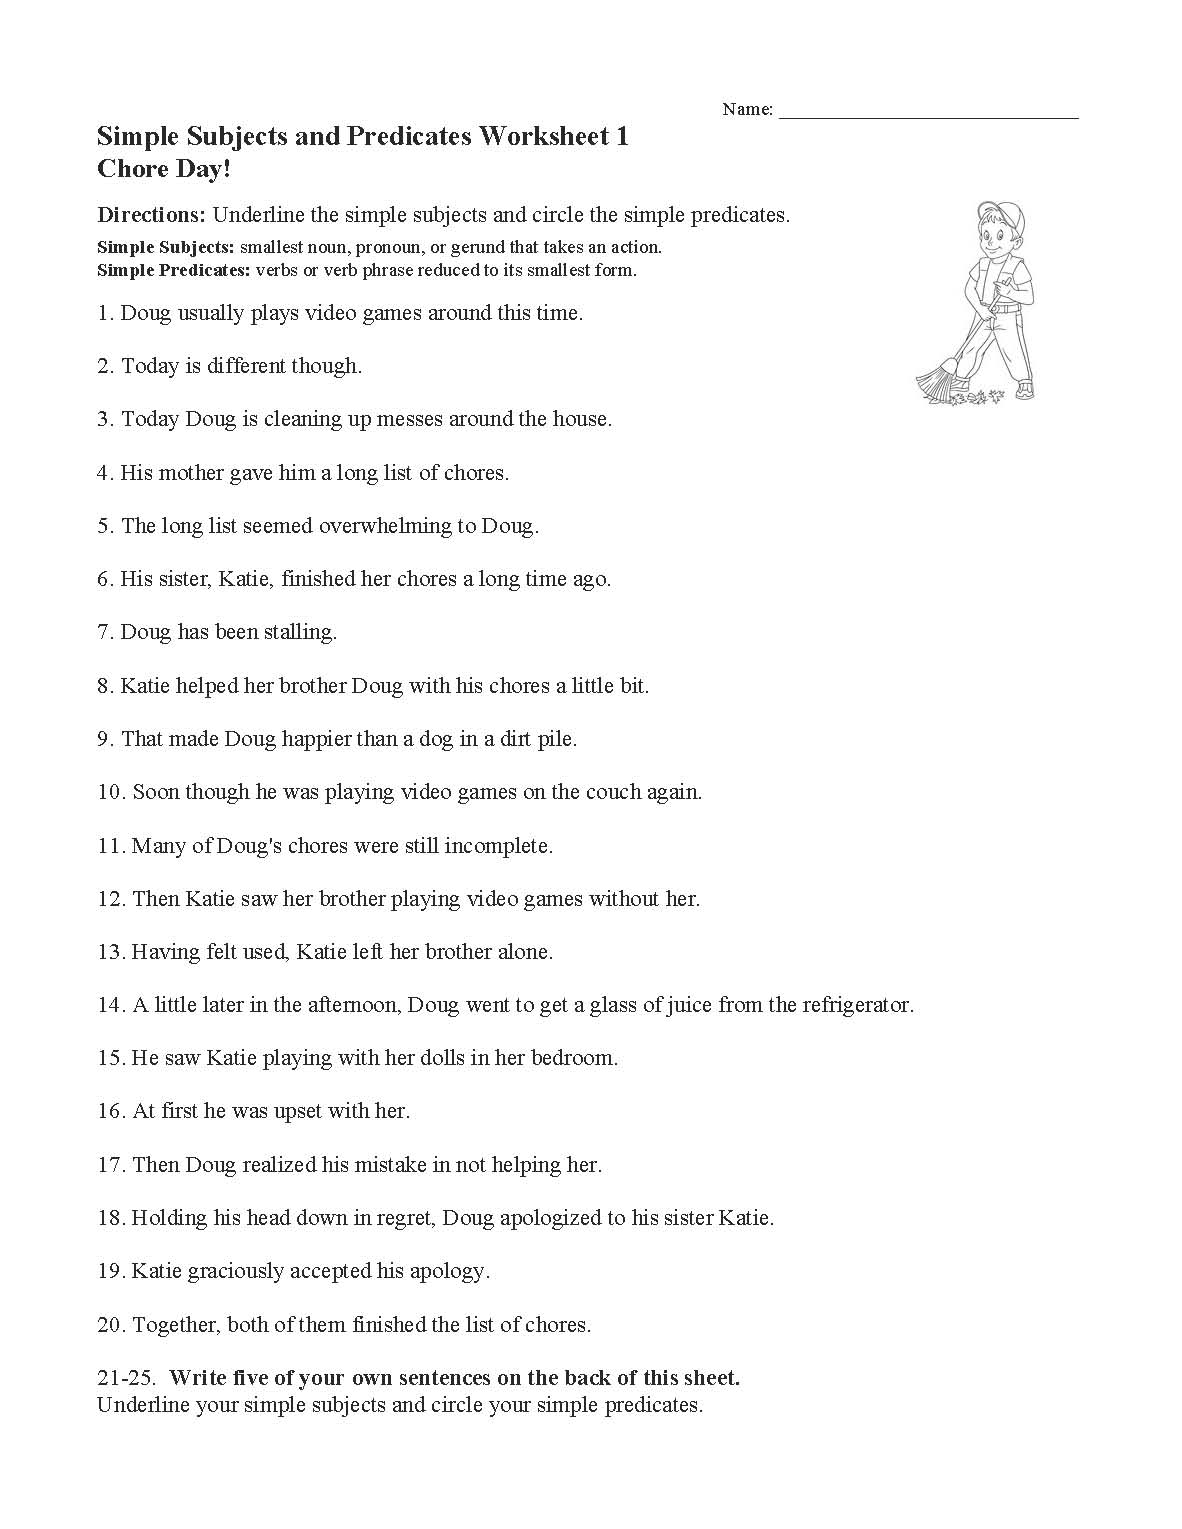 Subjects Predicates And Sentences Continued Answers Huff Hatrance